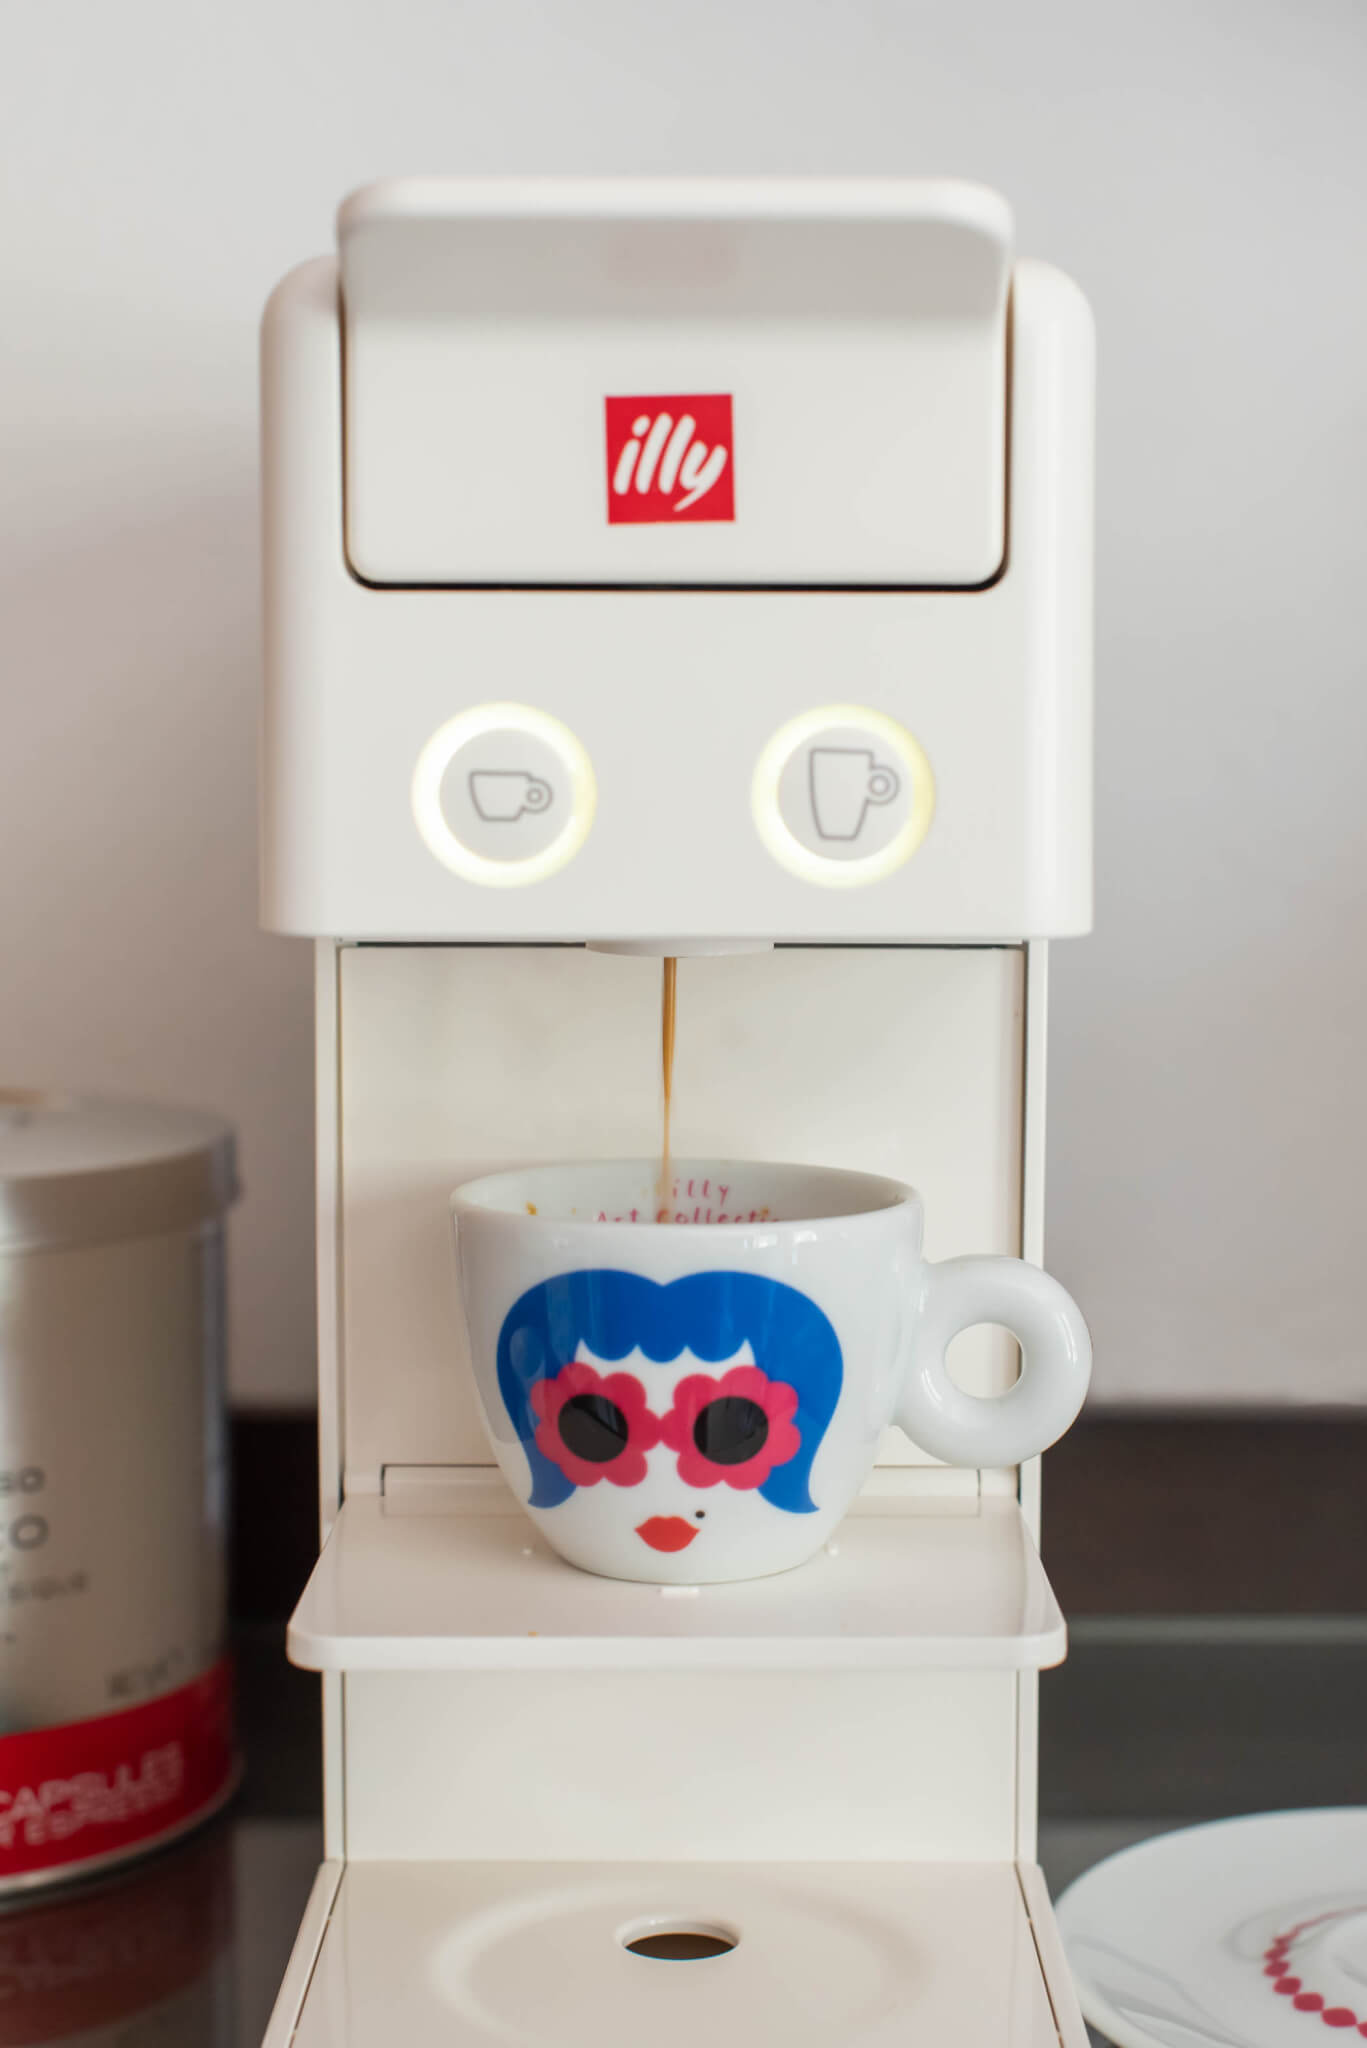 illy coffee